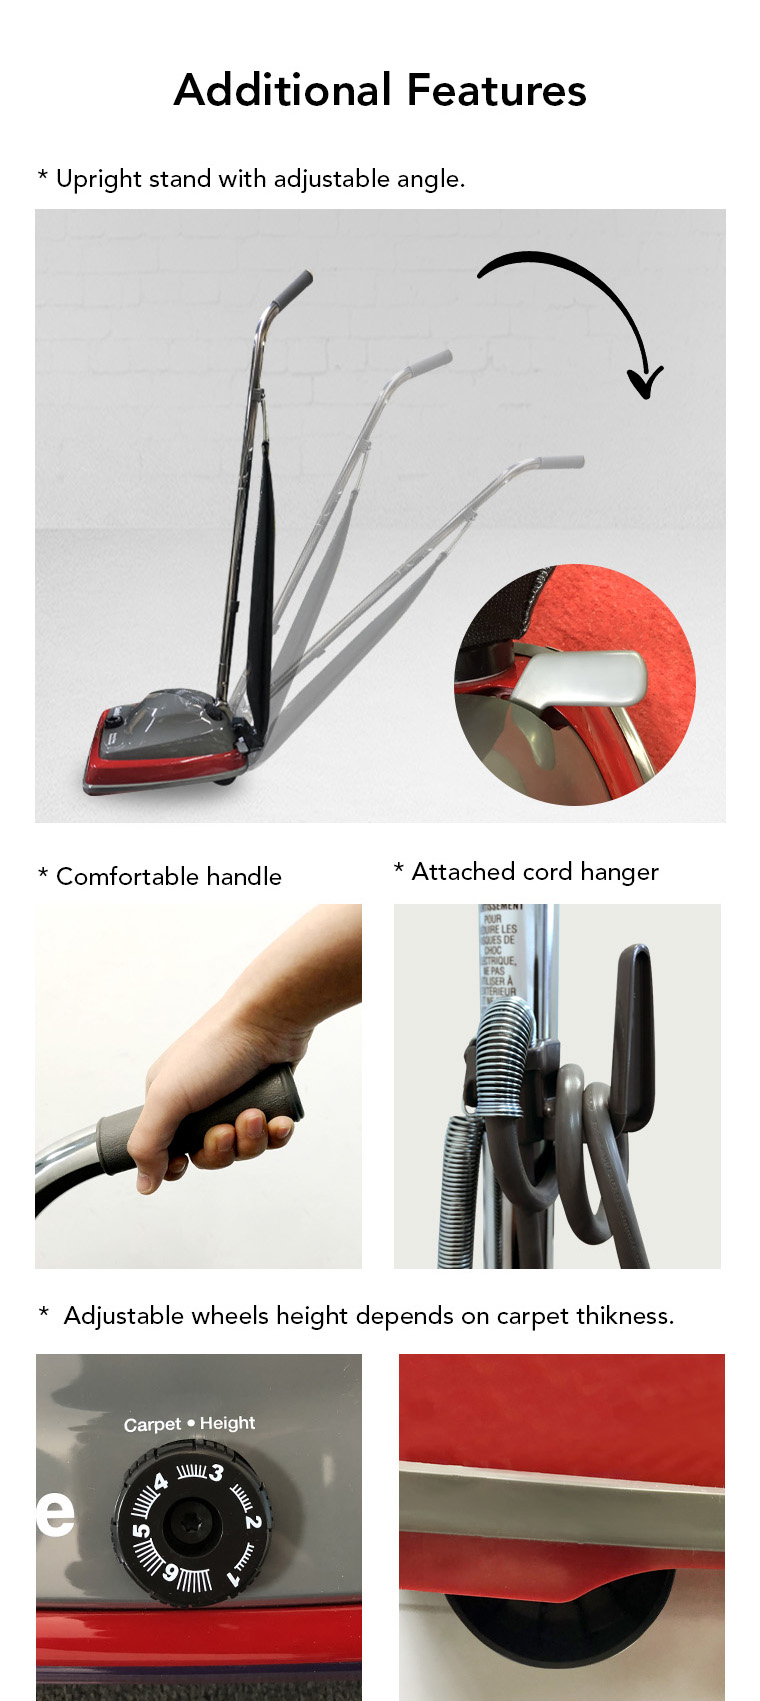 additional features, adjustable angle, comfortable handle, cord hanger, wheels height.